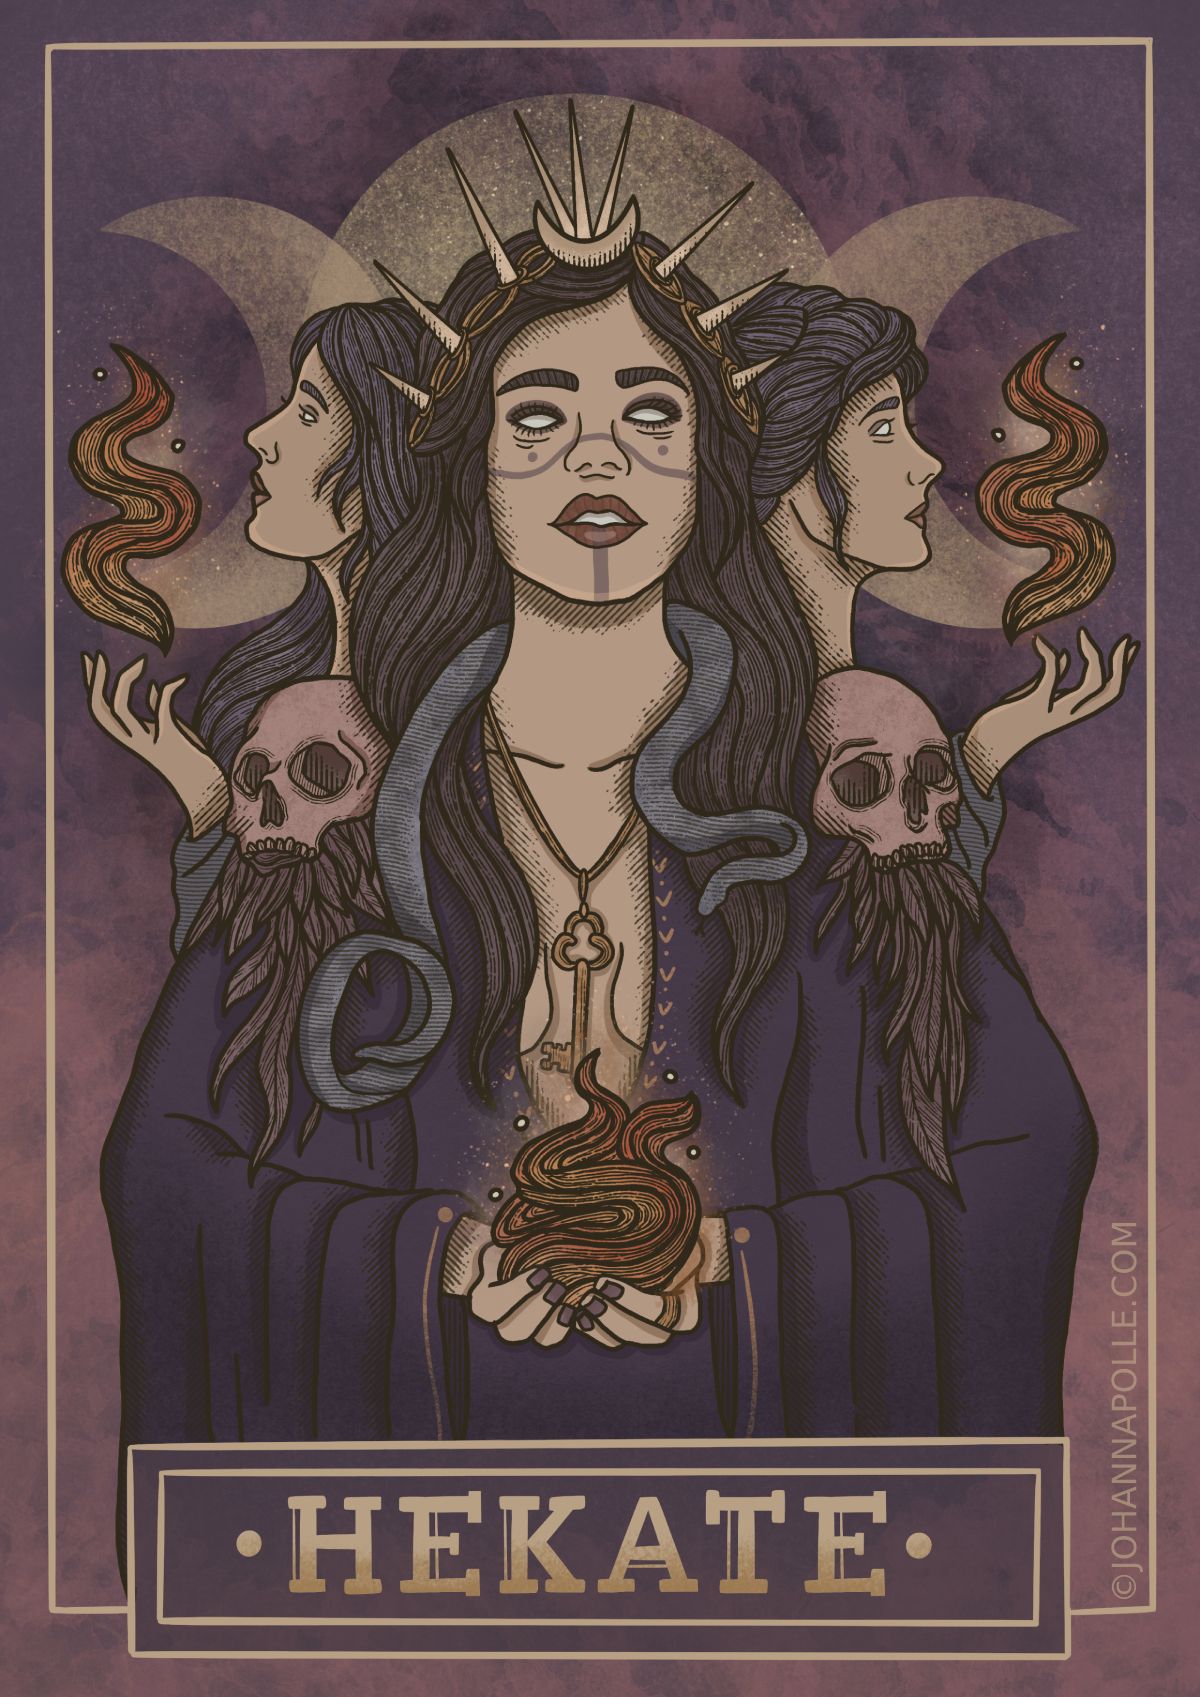 Hecate Hekate ideas. hekate, hecate, hecate goddess